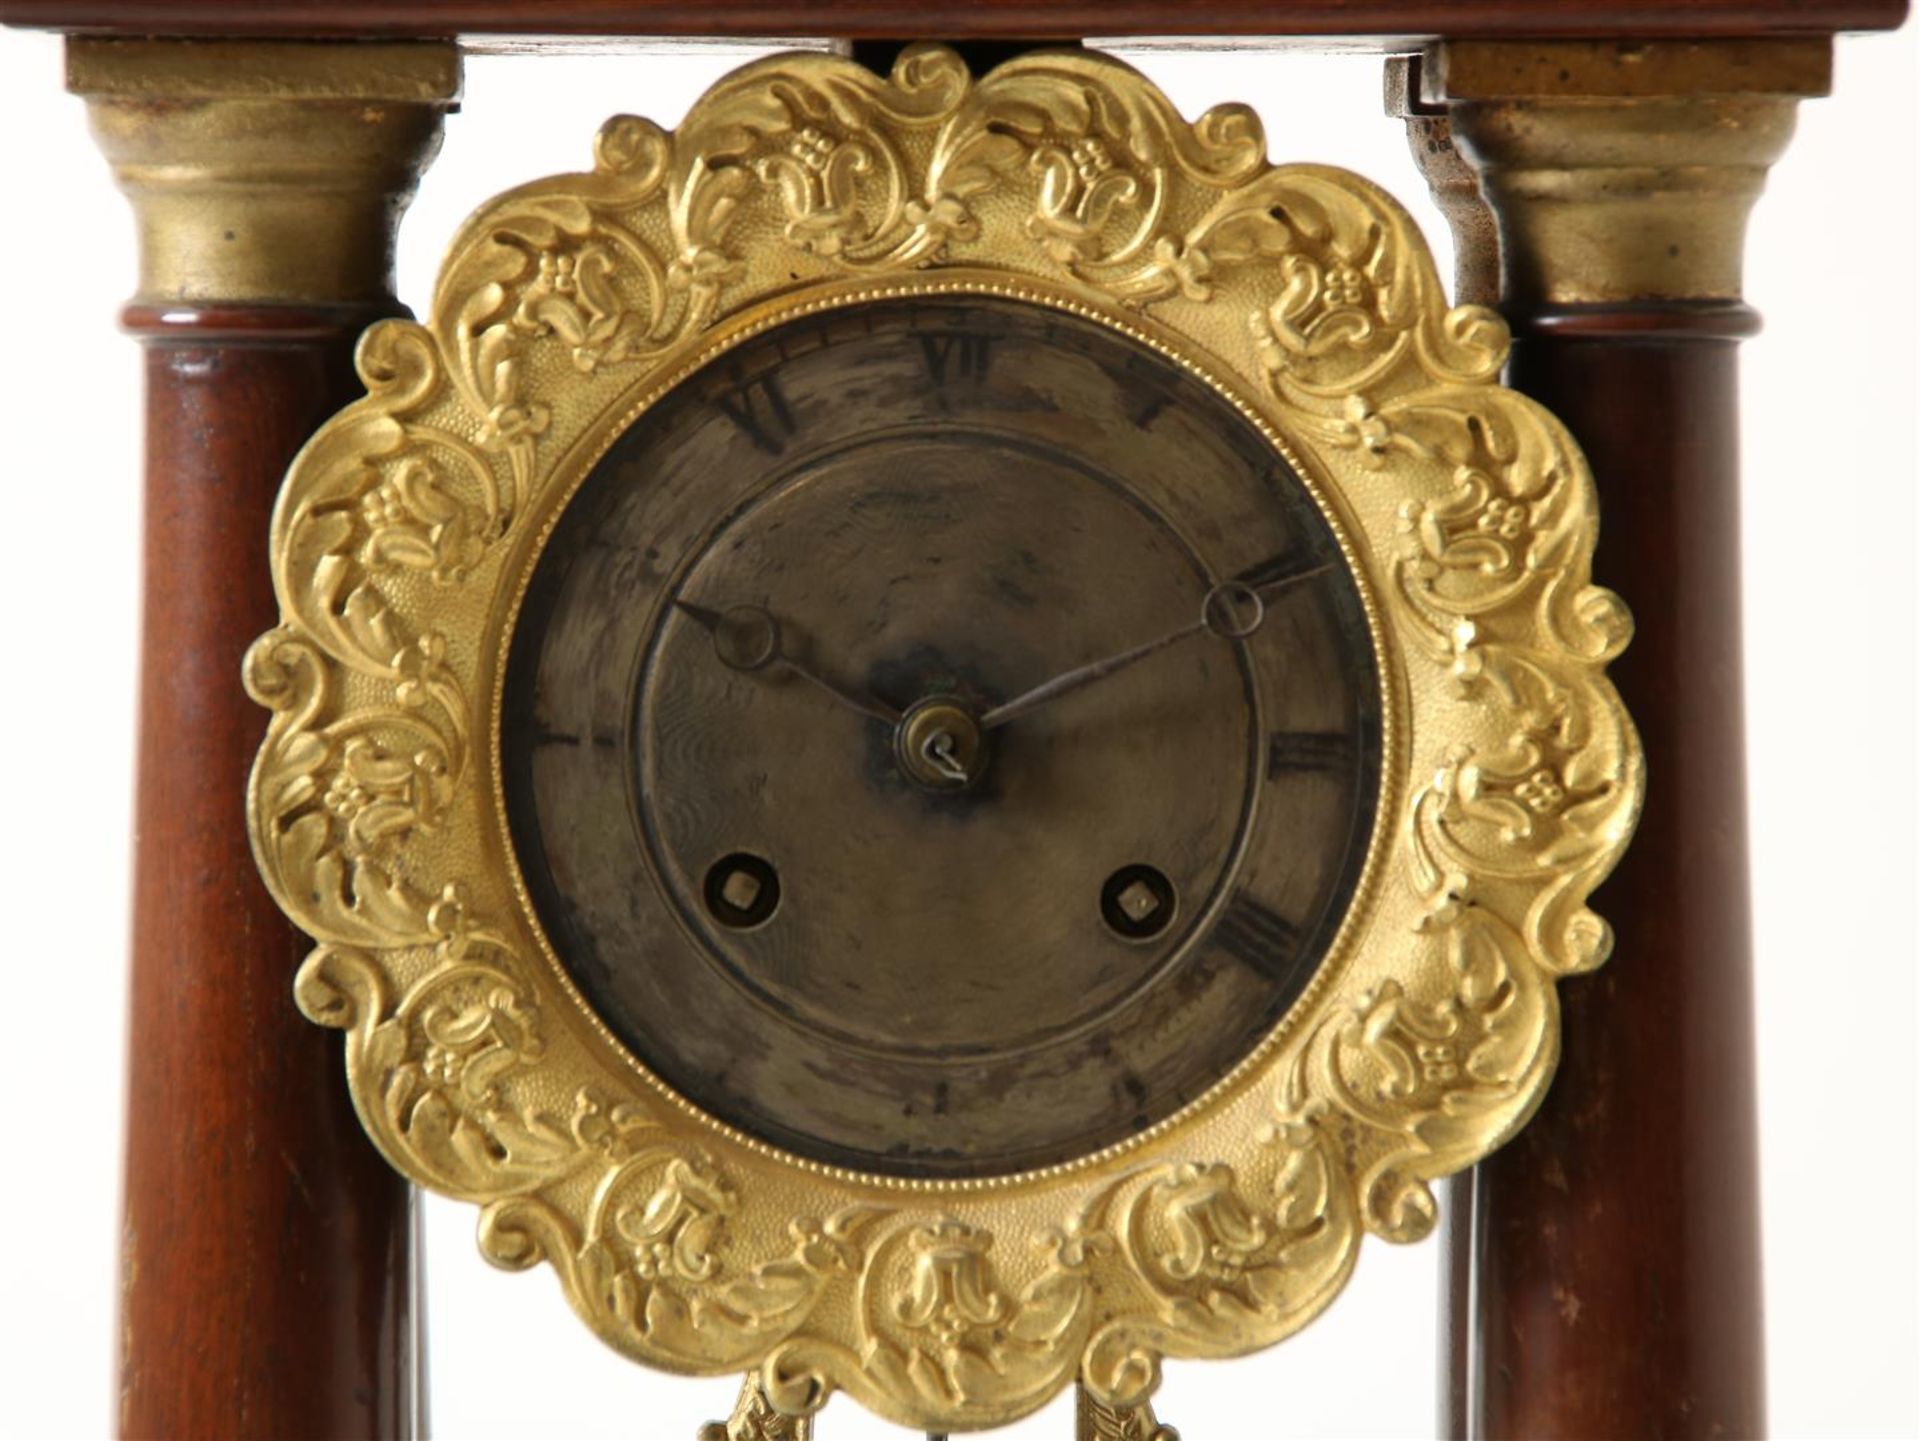 Empire column mantel clock with bronze dial in mahogany case, 19th century, height 41 cm. - Image 2 of 5